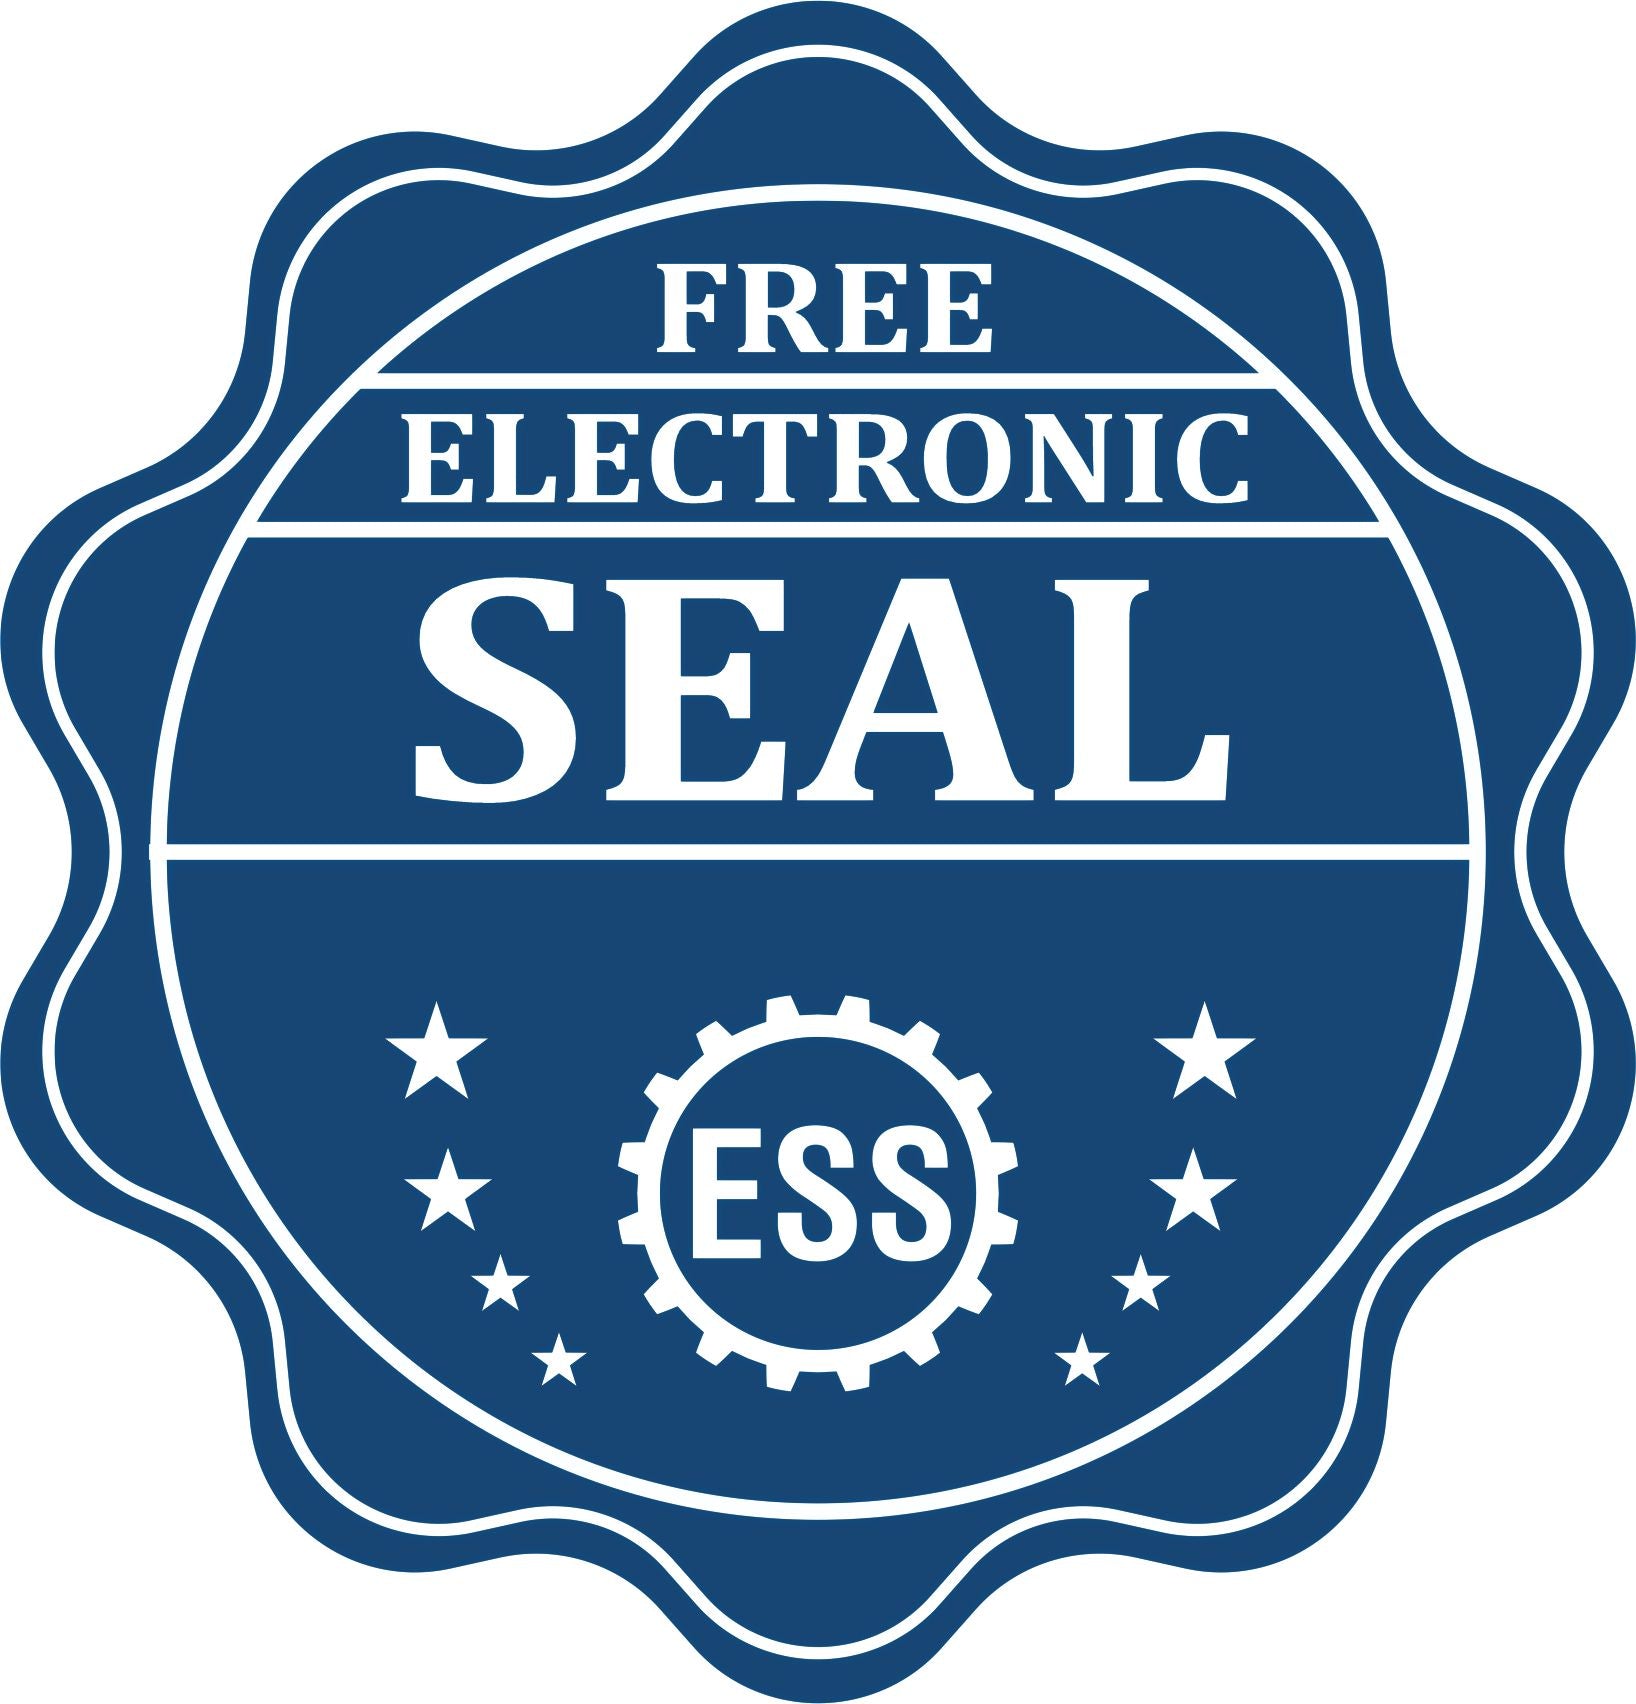 A badge showing a free electronic seal for the Hybrid Florida Land Surveyor Seal with stars and the ESS gear on the emblem.